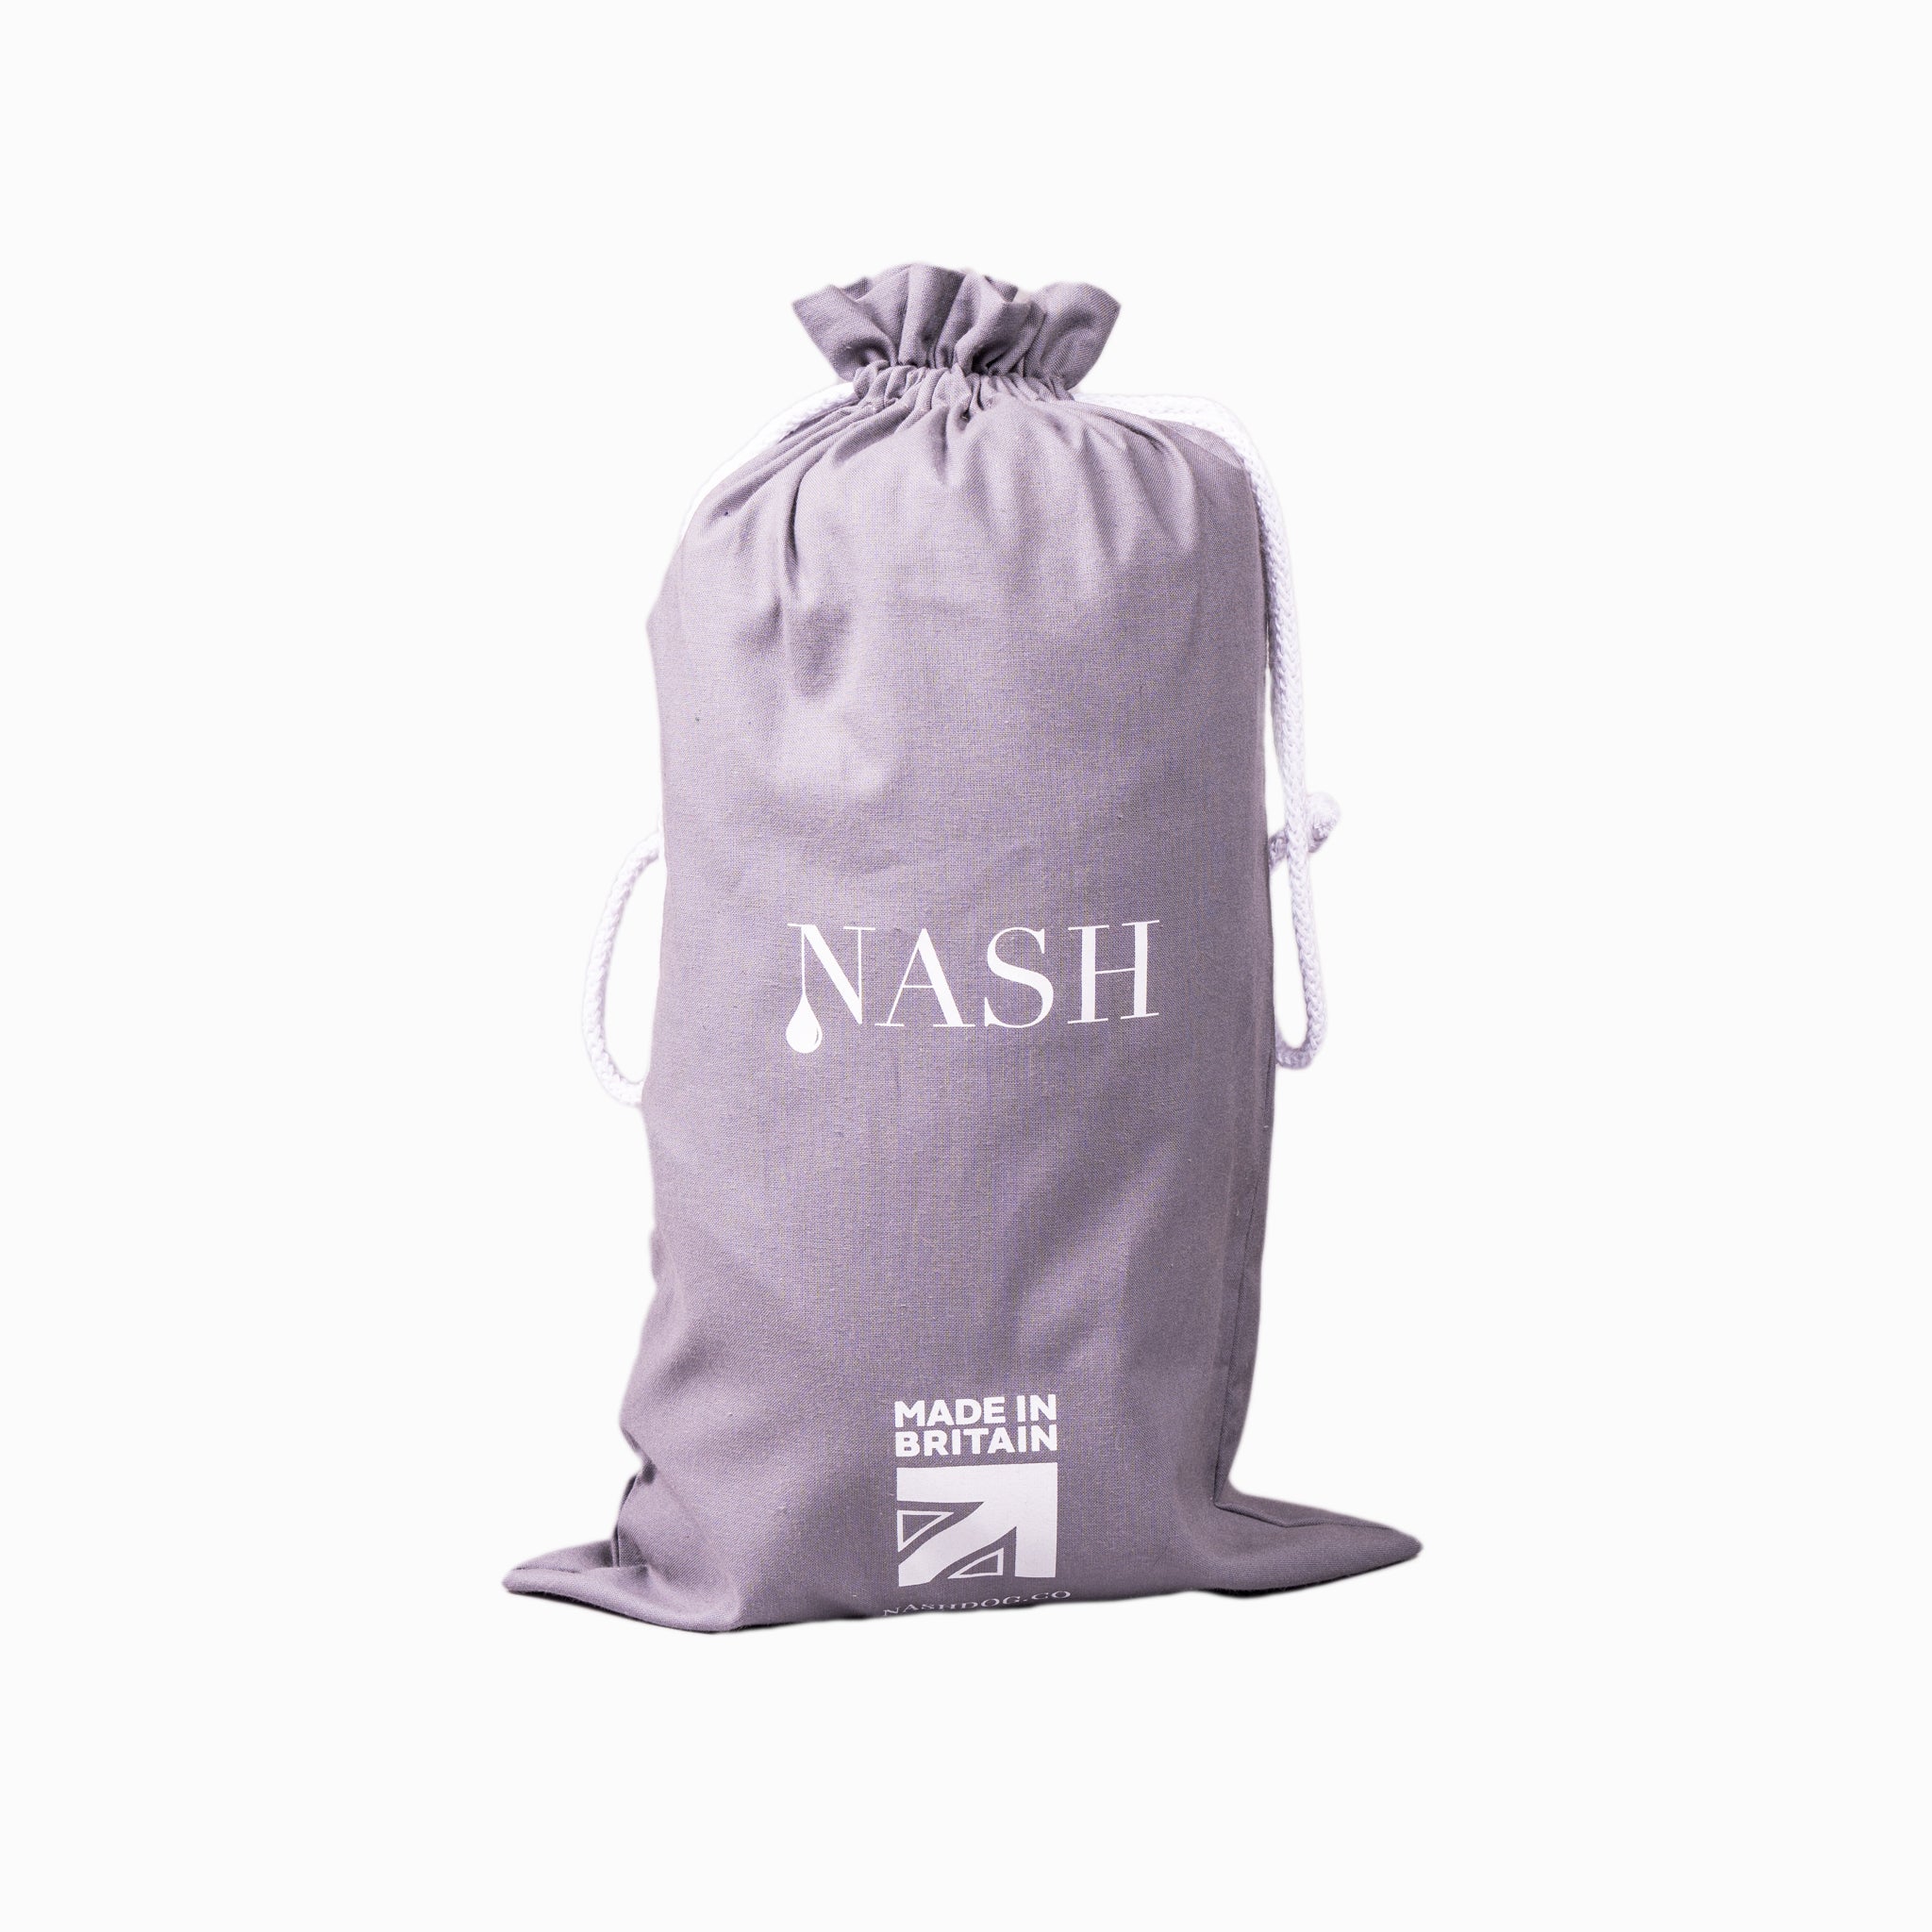 The reusable drawstring bag for the NASH bamboo dog bed cover. 